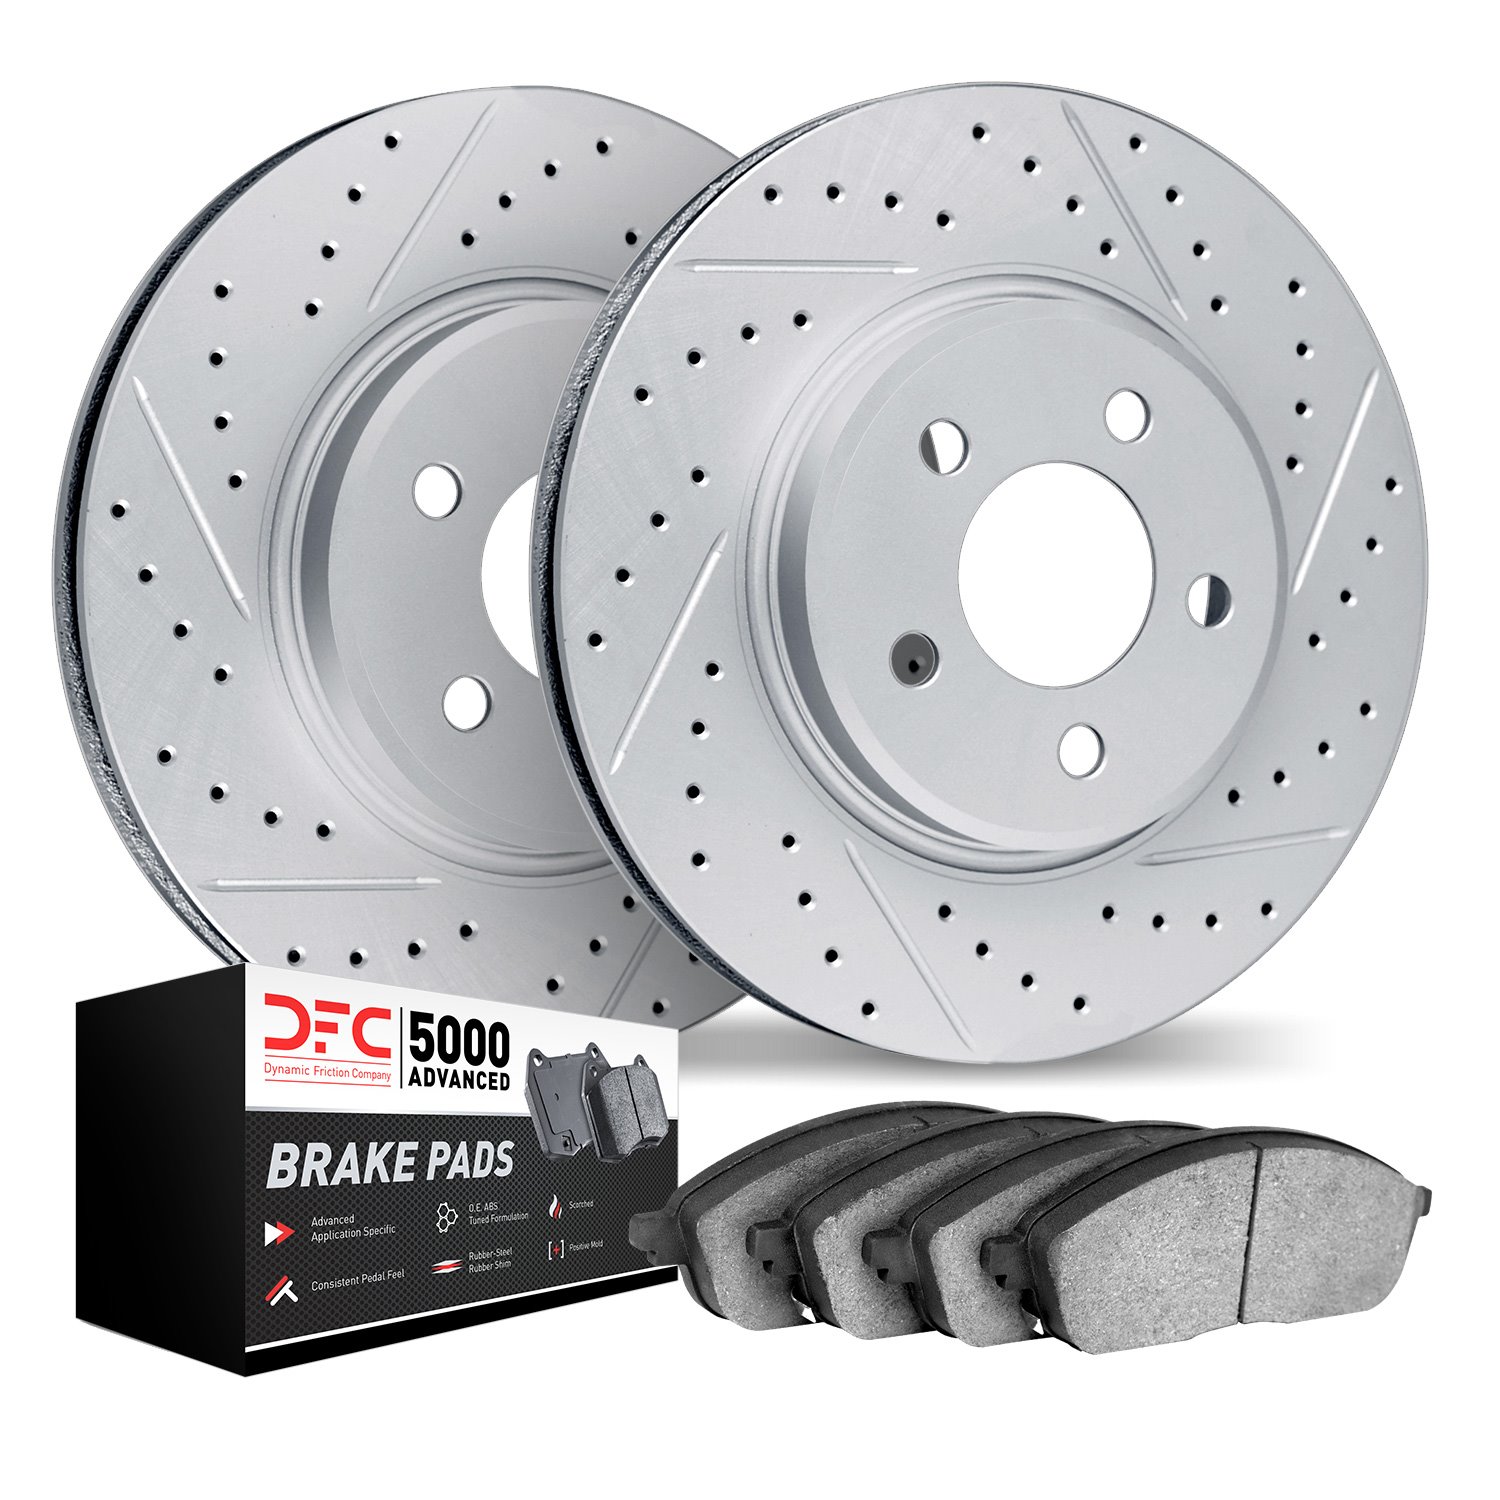 2502-31134 Geoperformance Drilled/Slotted Rotors w/5000 Advanced Brake Pads Kit, Fits Select Mini, Position: Front